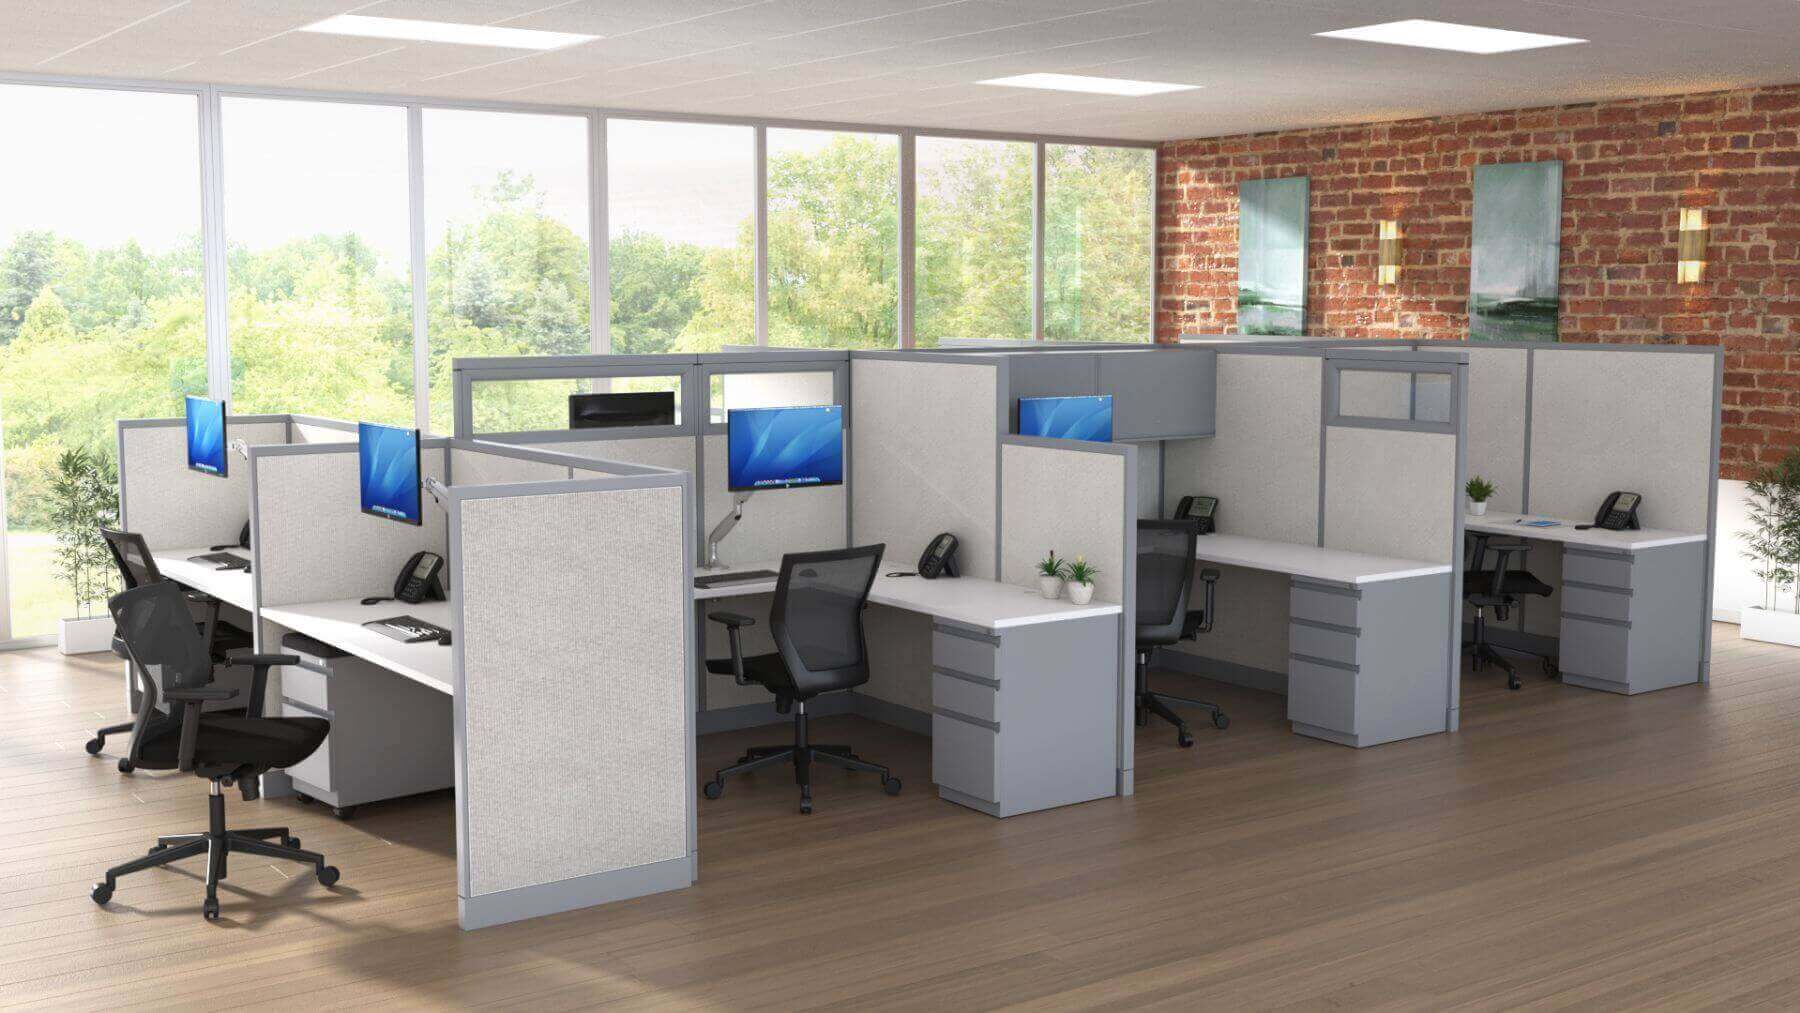 An office cubicle with multiple cubicles and desks
